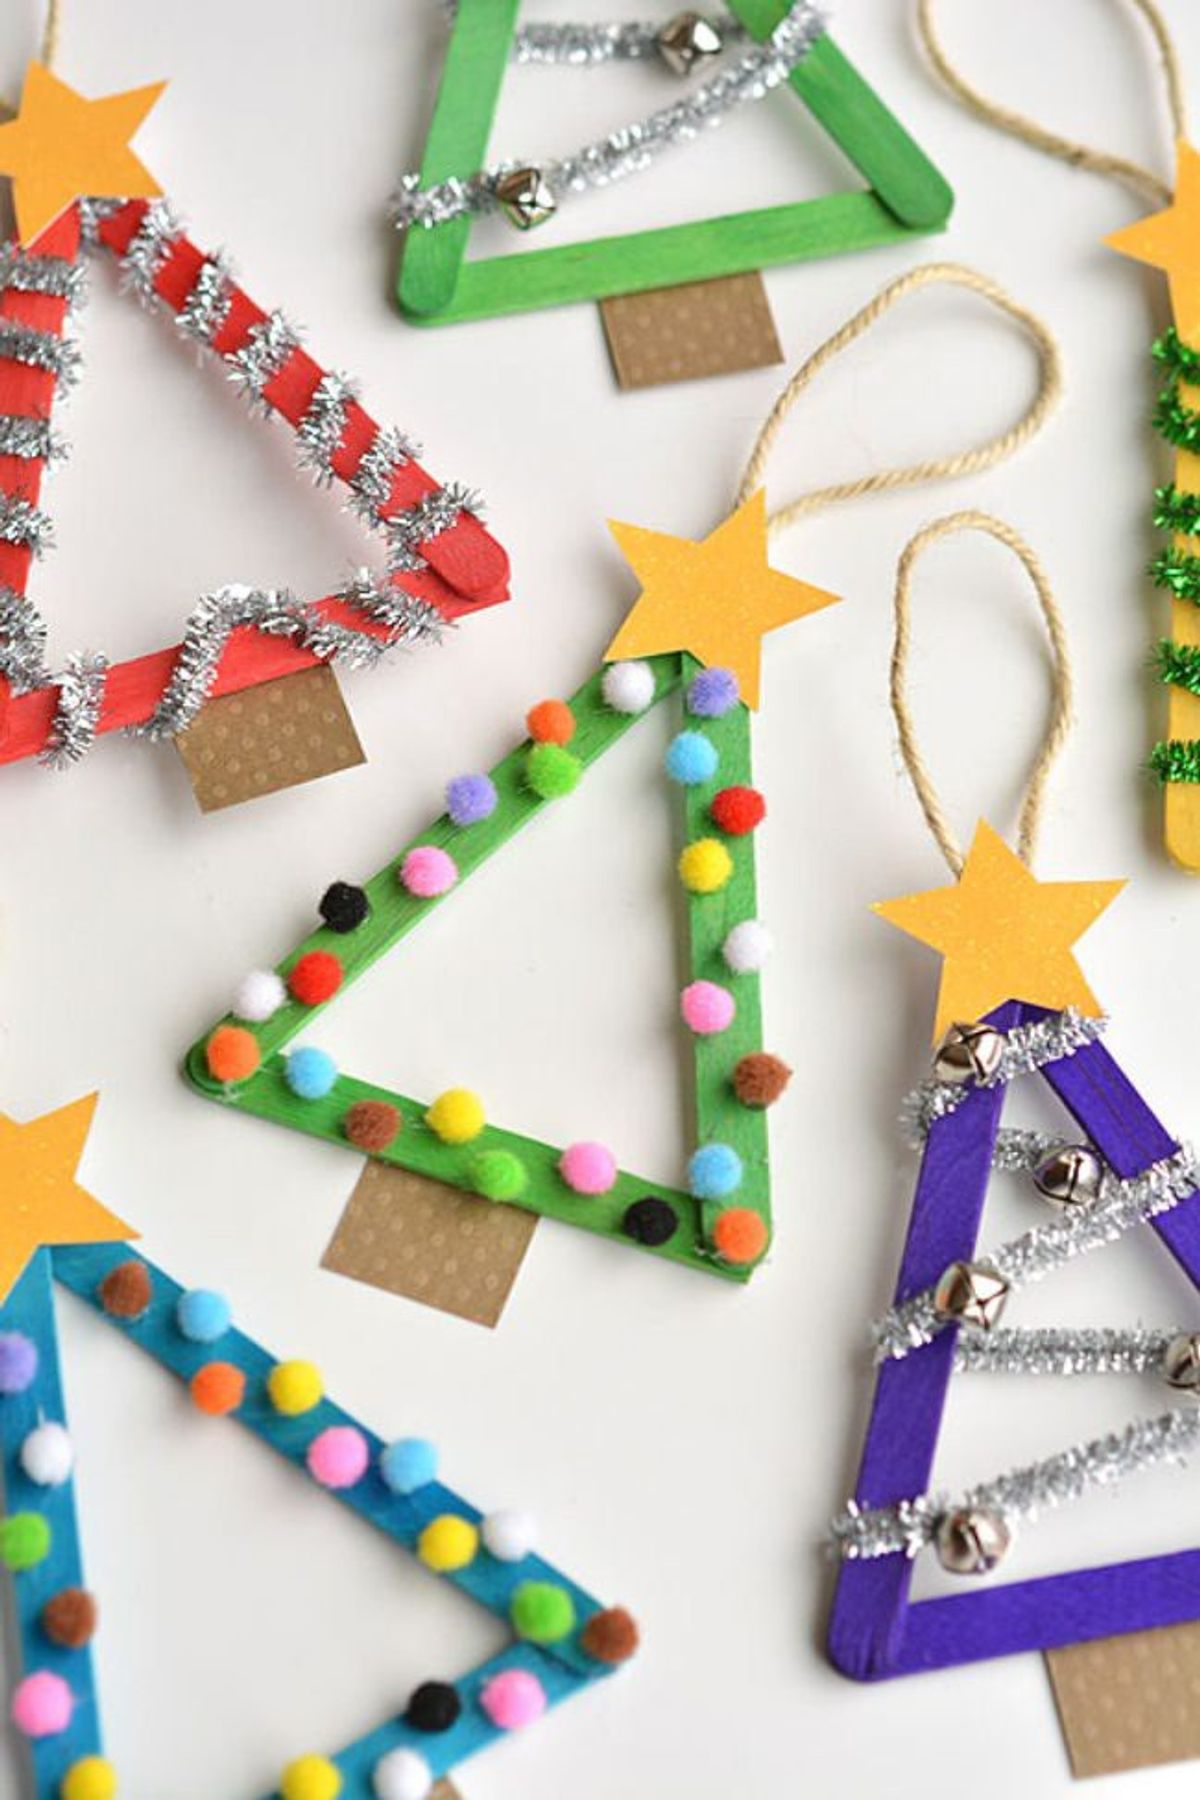 Five Best Christmas Crafts